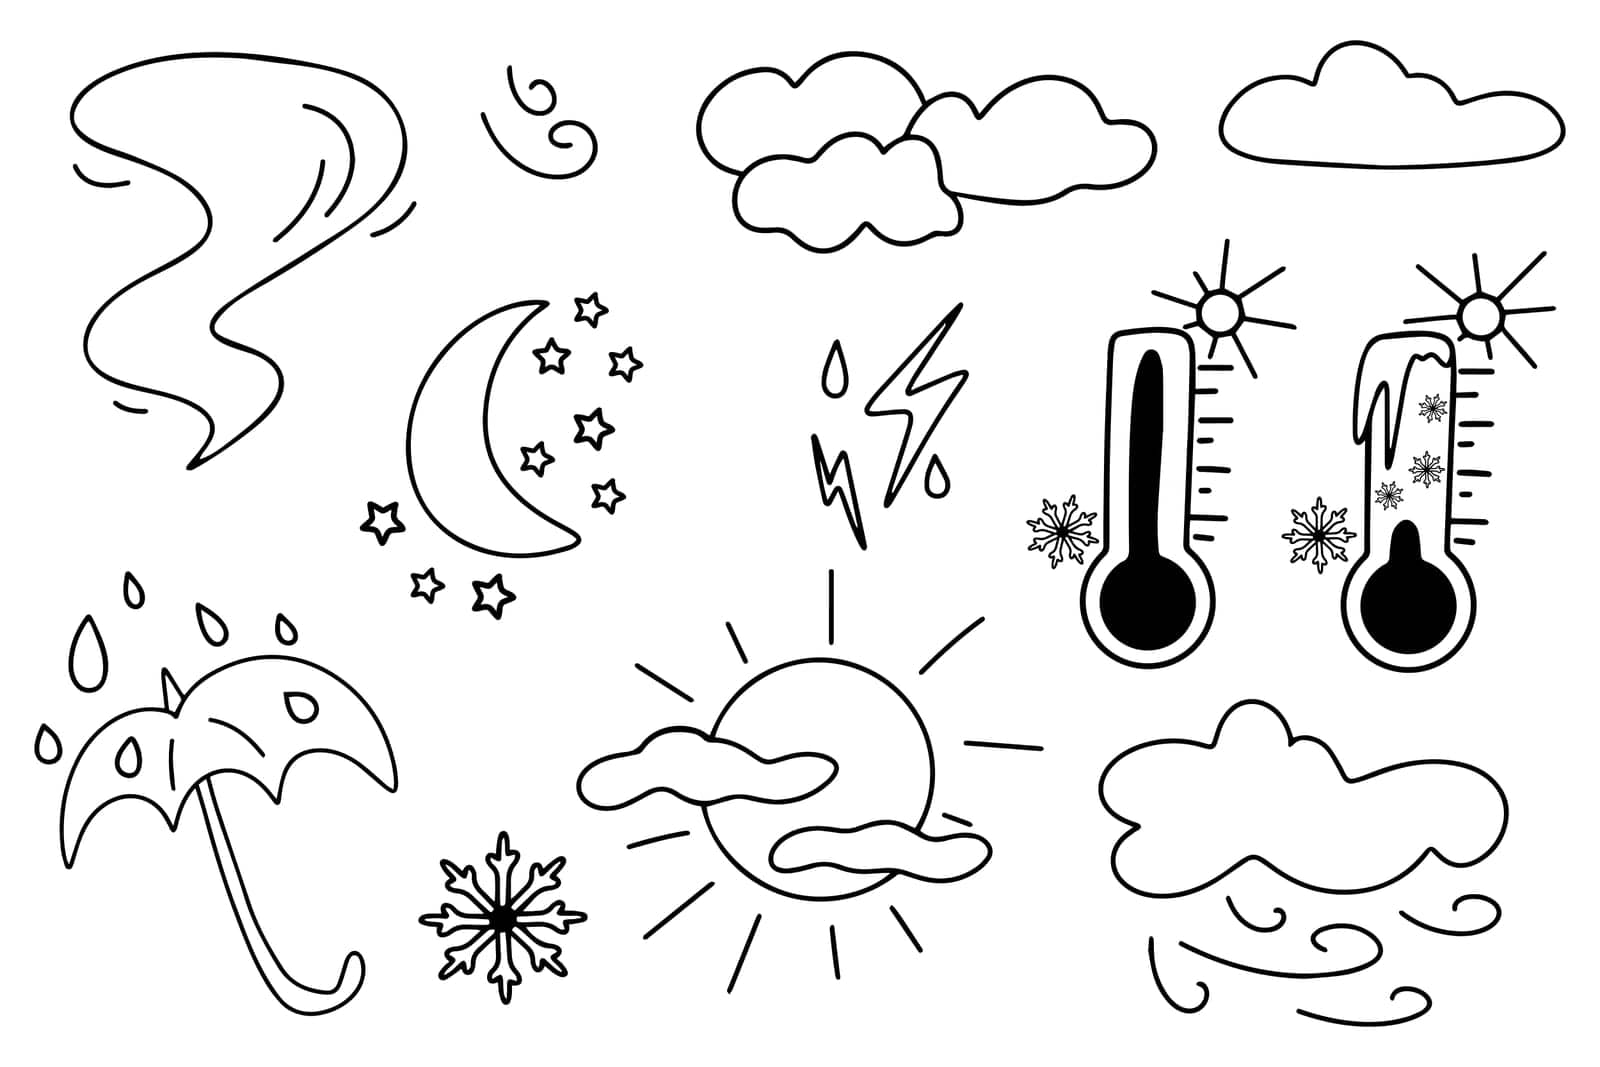 Set of icons for the weather forecast in the doodle style. Simple hand-drawn weather icons. Black and white doodles of sunny, rainy, foggy, cloudy, windy weather and thunderstorms